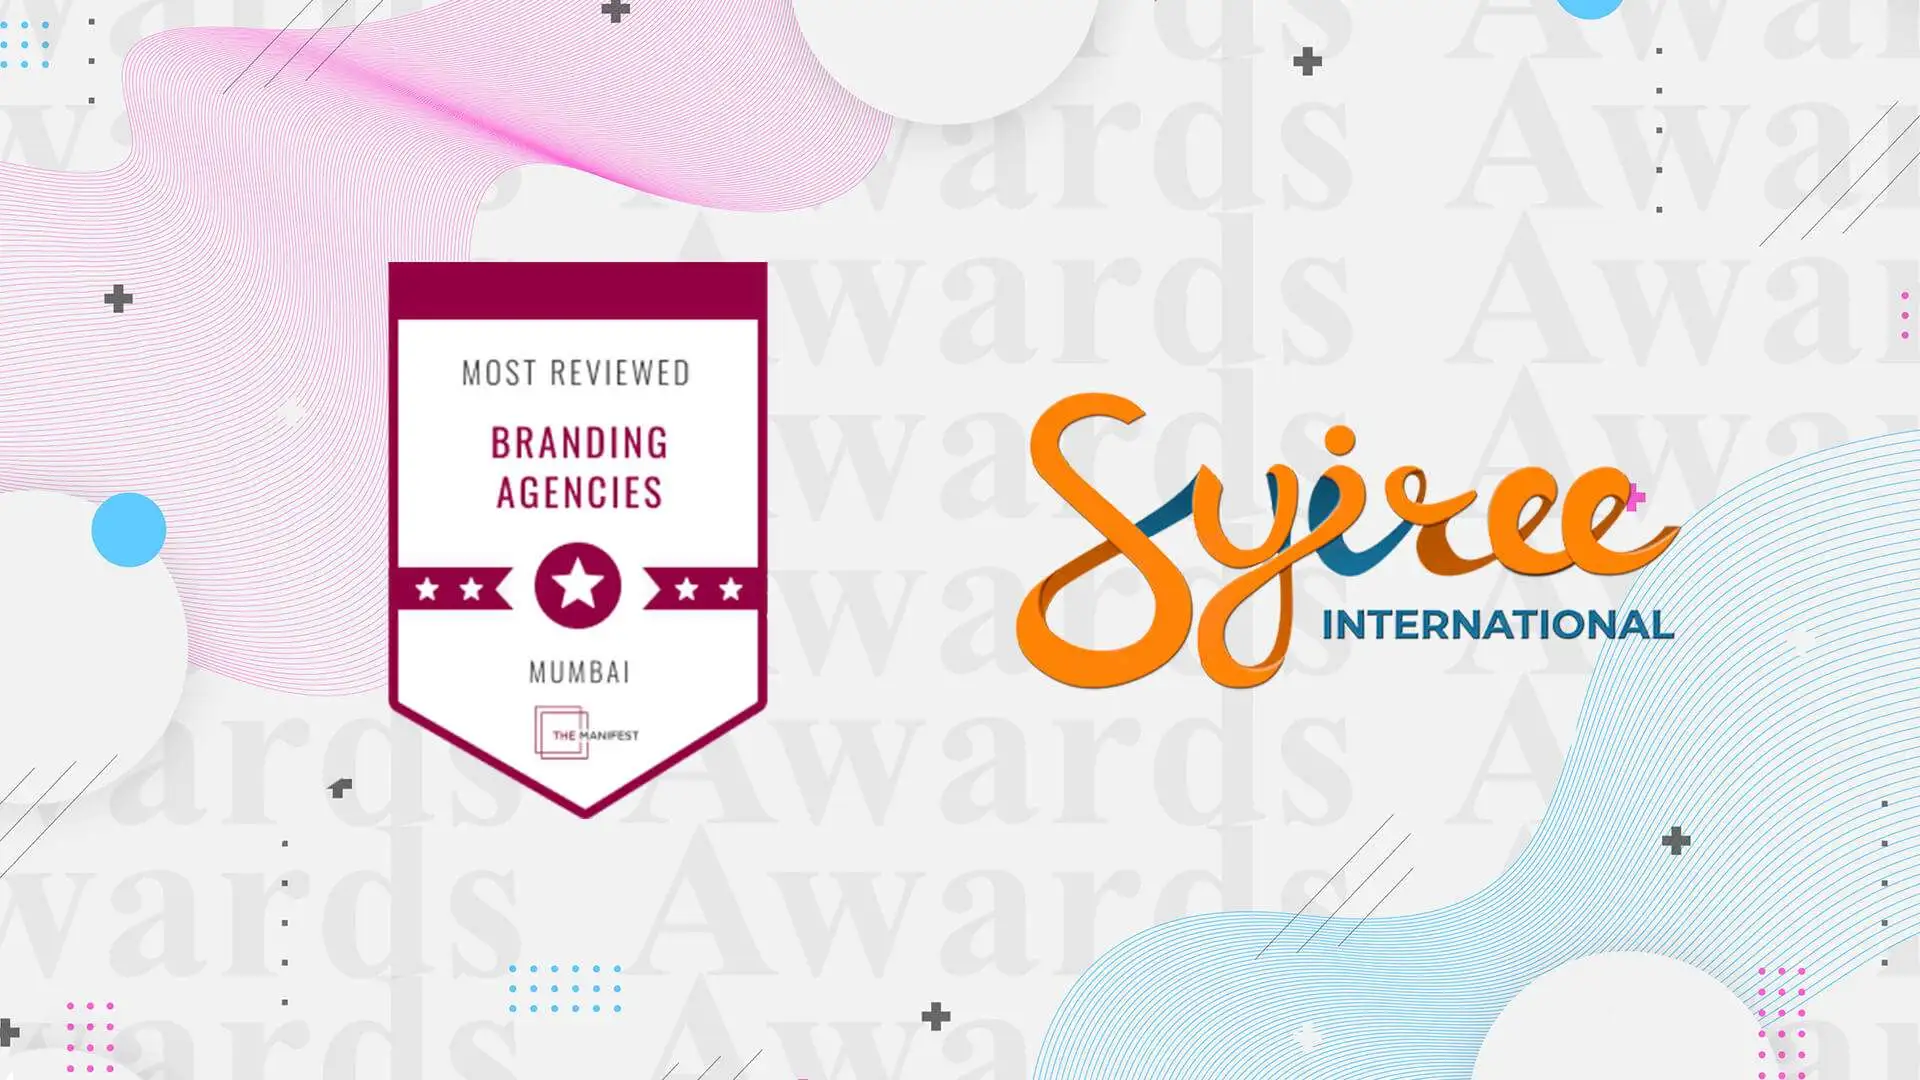 Syiree International Won Awward for Most reviewed Branding Agency in Mumbai by The Manifest from Washington DC The United States of America Press Release